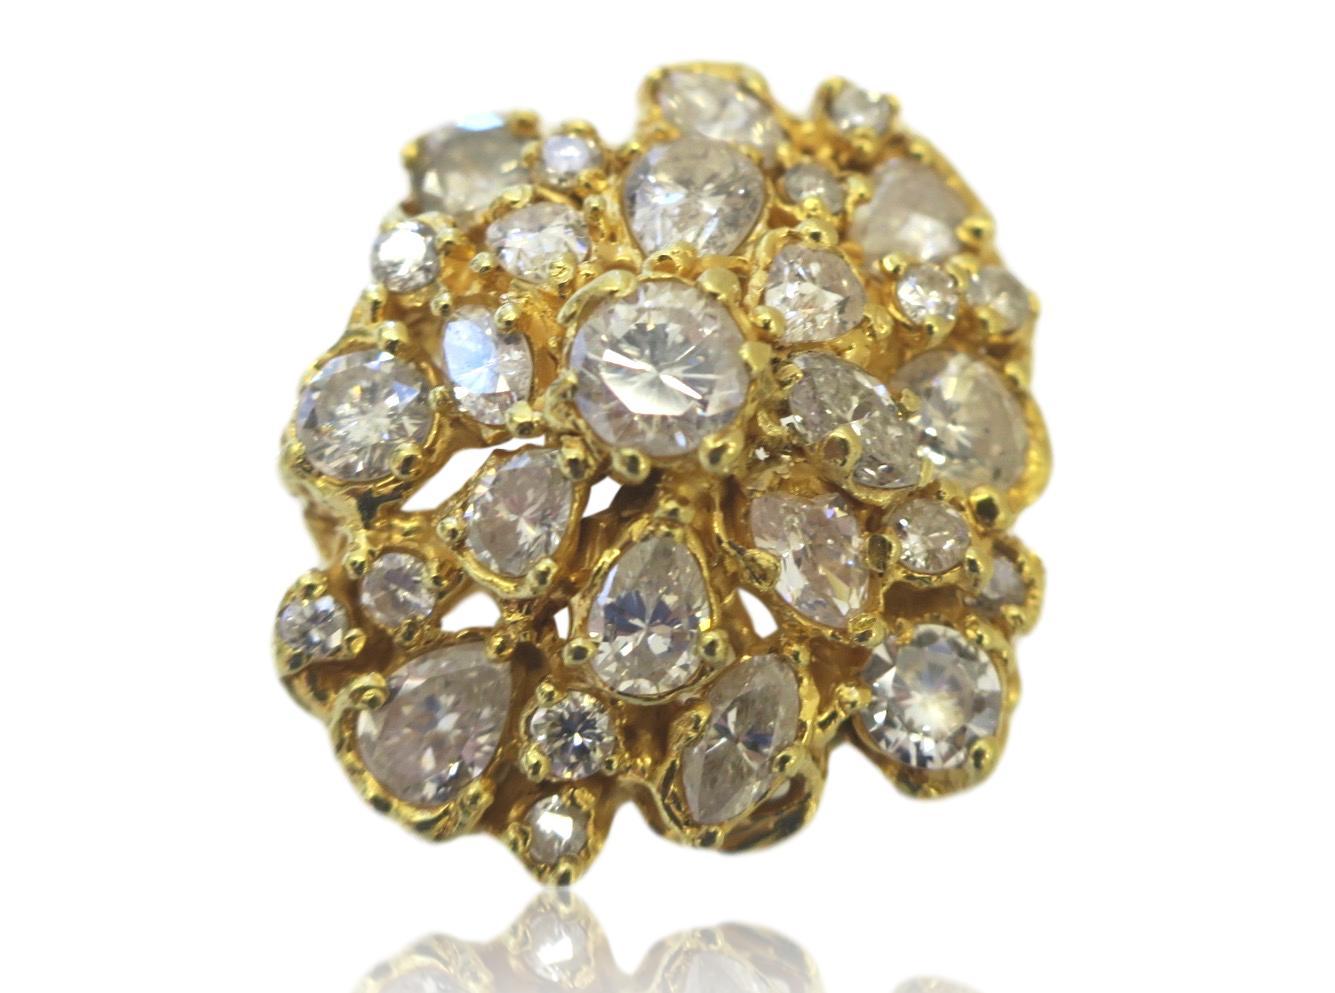 Freeform yellow gold diamond cluster ring. The 1